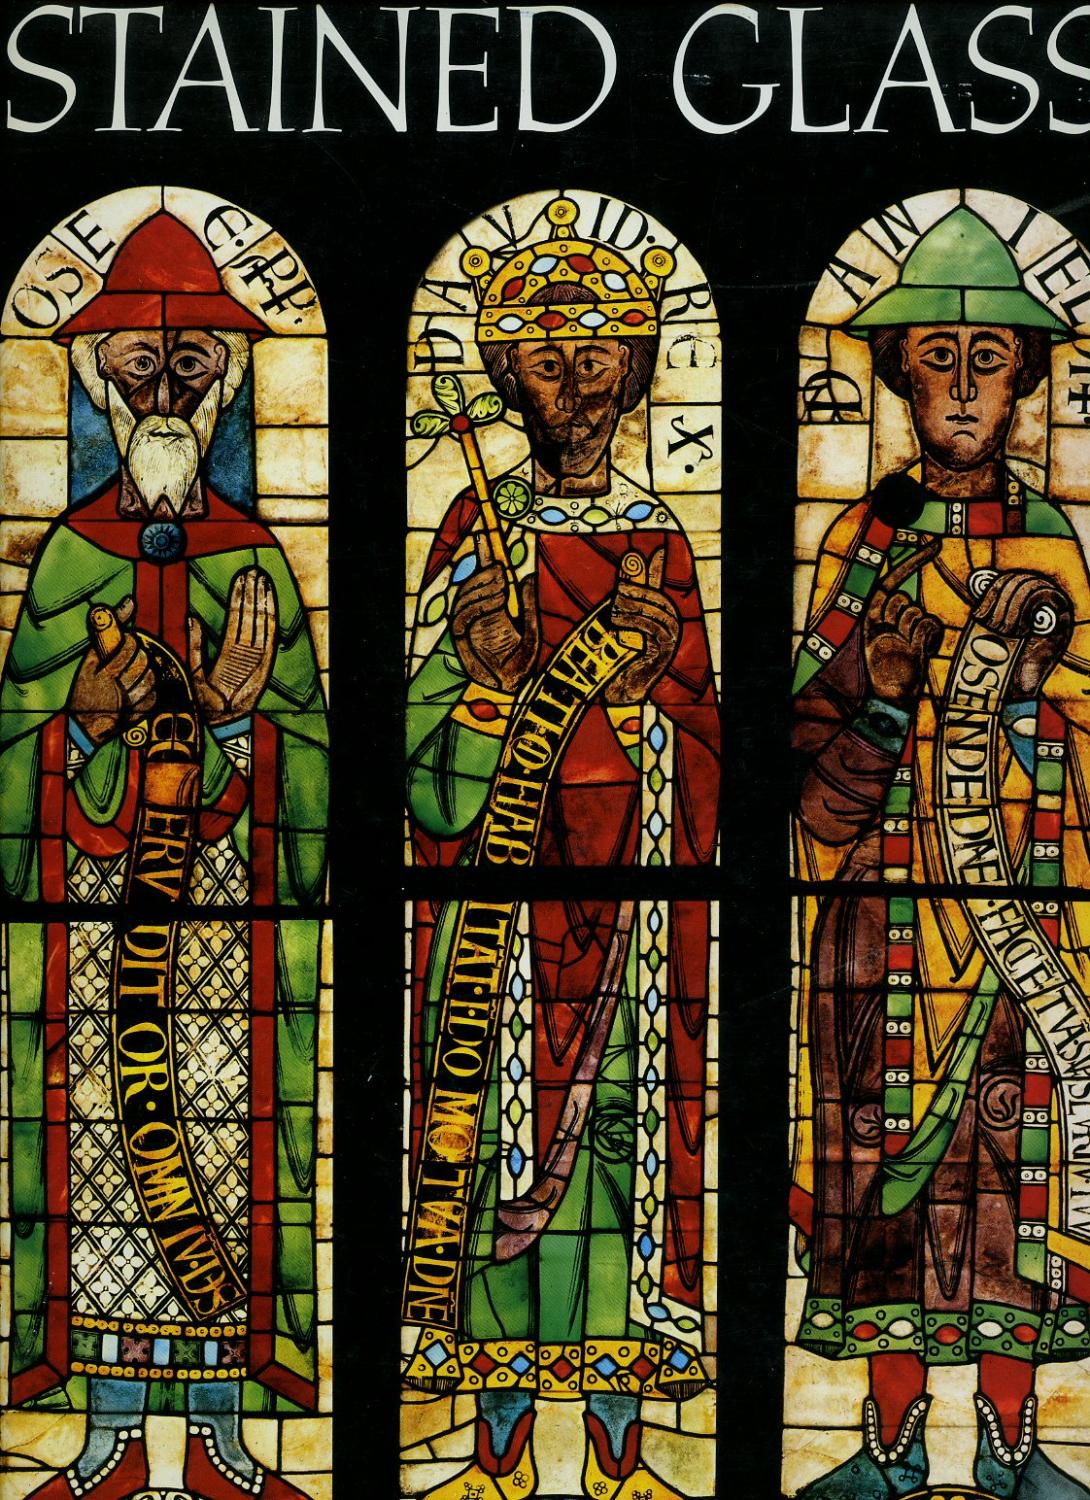 Stained Glass - Lawrence Lee, George Seddon, Francis Stephens [Photographs by Sonia Halliday and Laura Lushington]